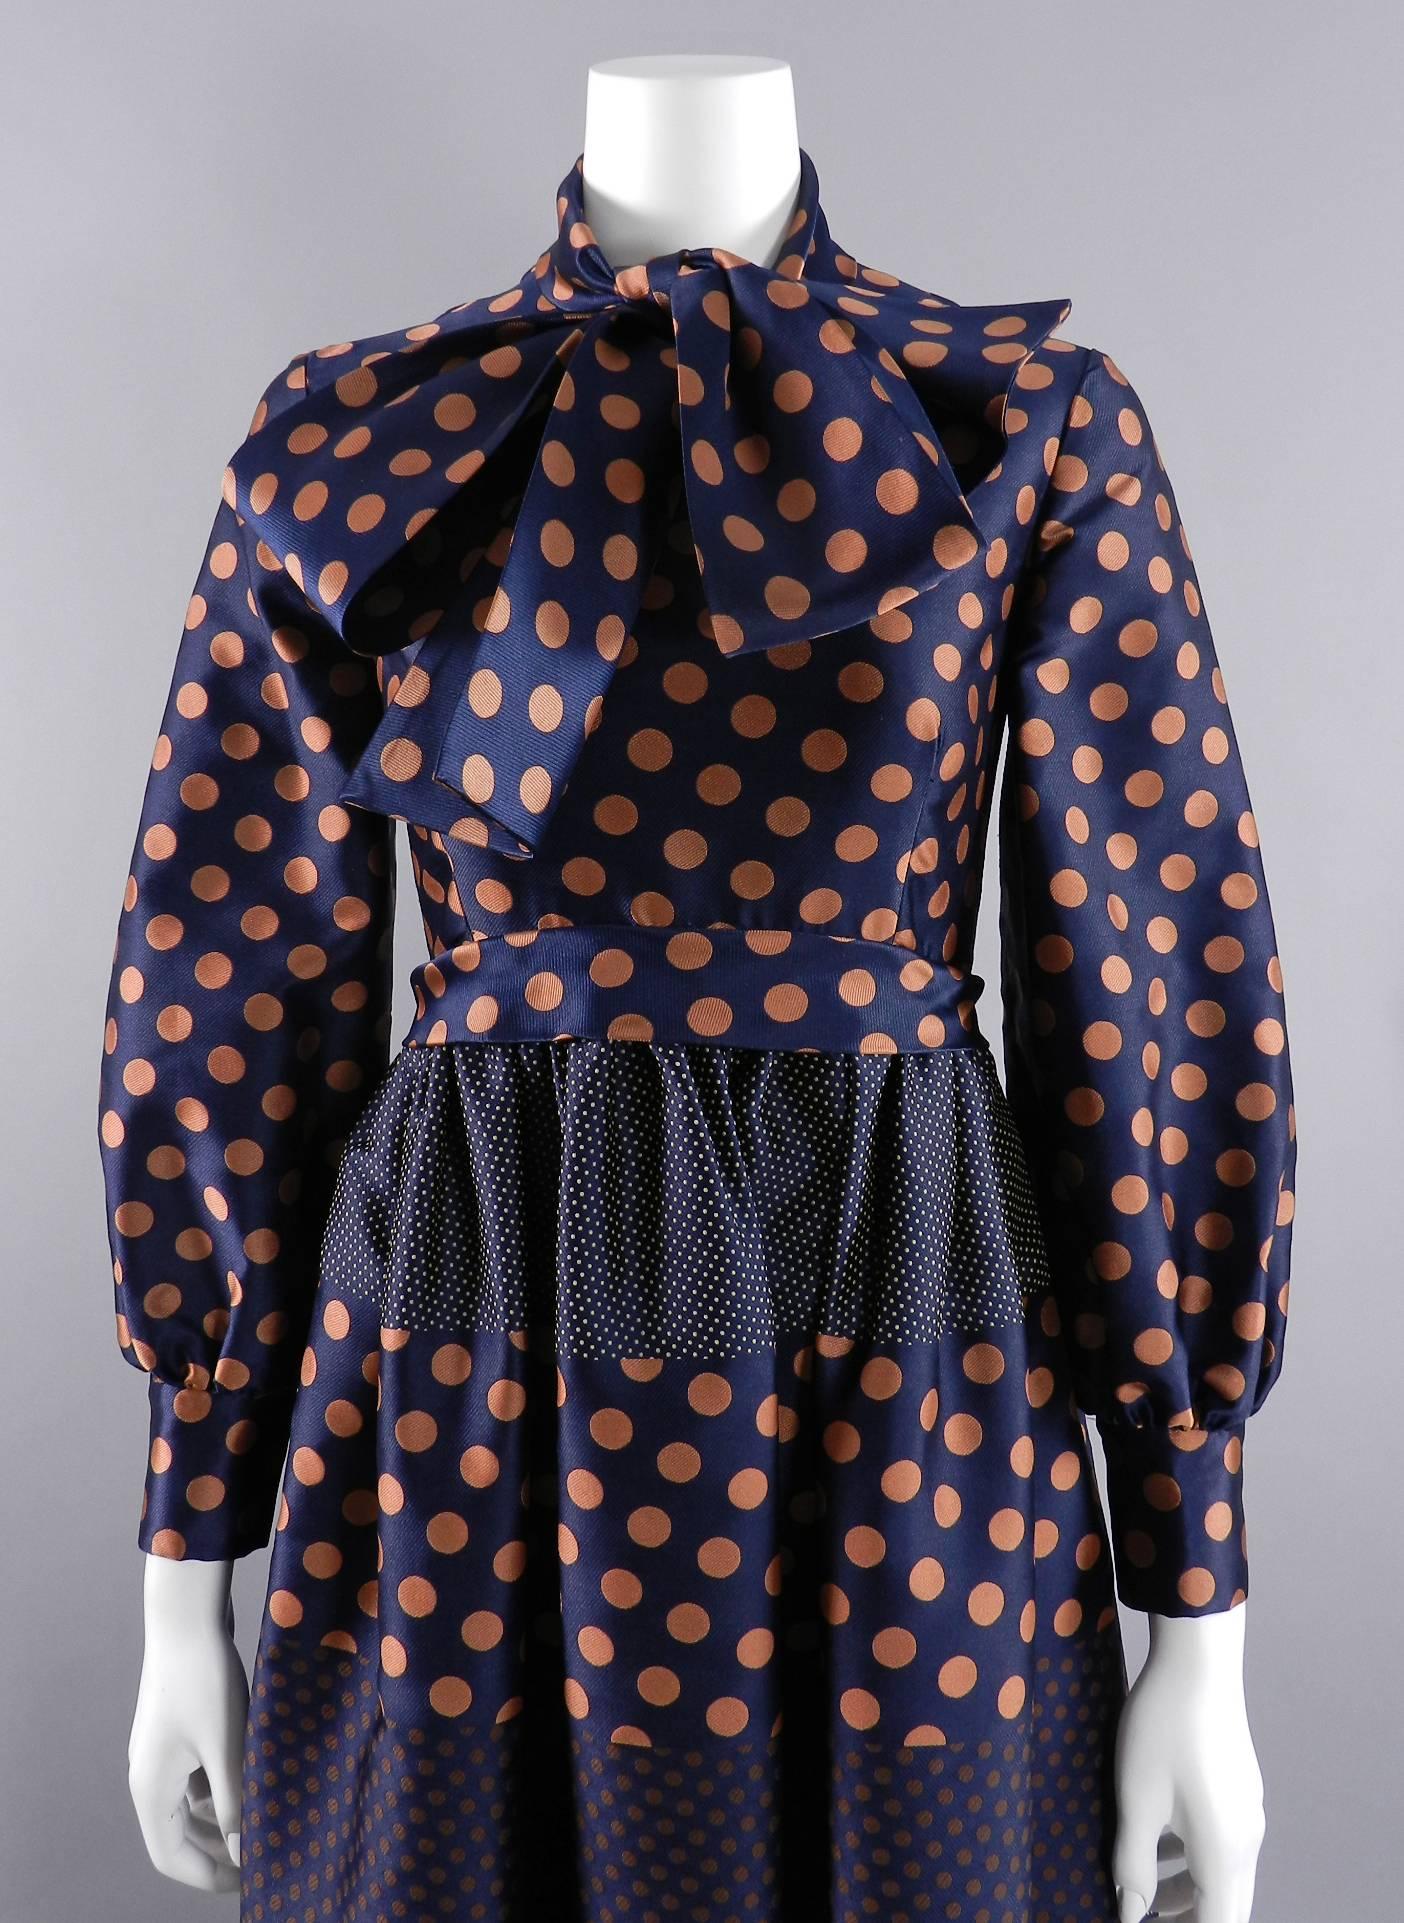 Geoffrey Beene 1970's Polkadot Gown with bow at Neck In Excellent Condition For Sale In Toronto, ON